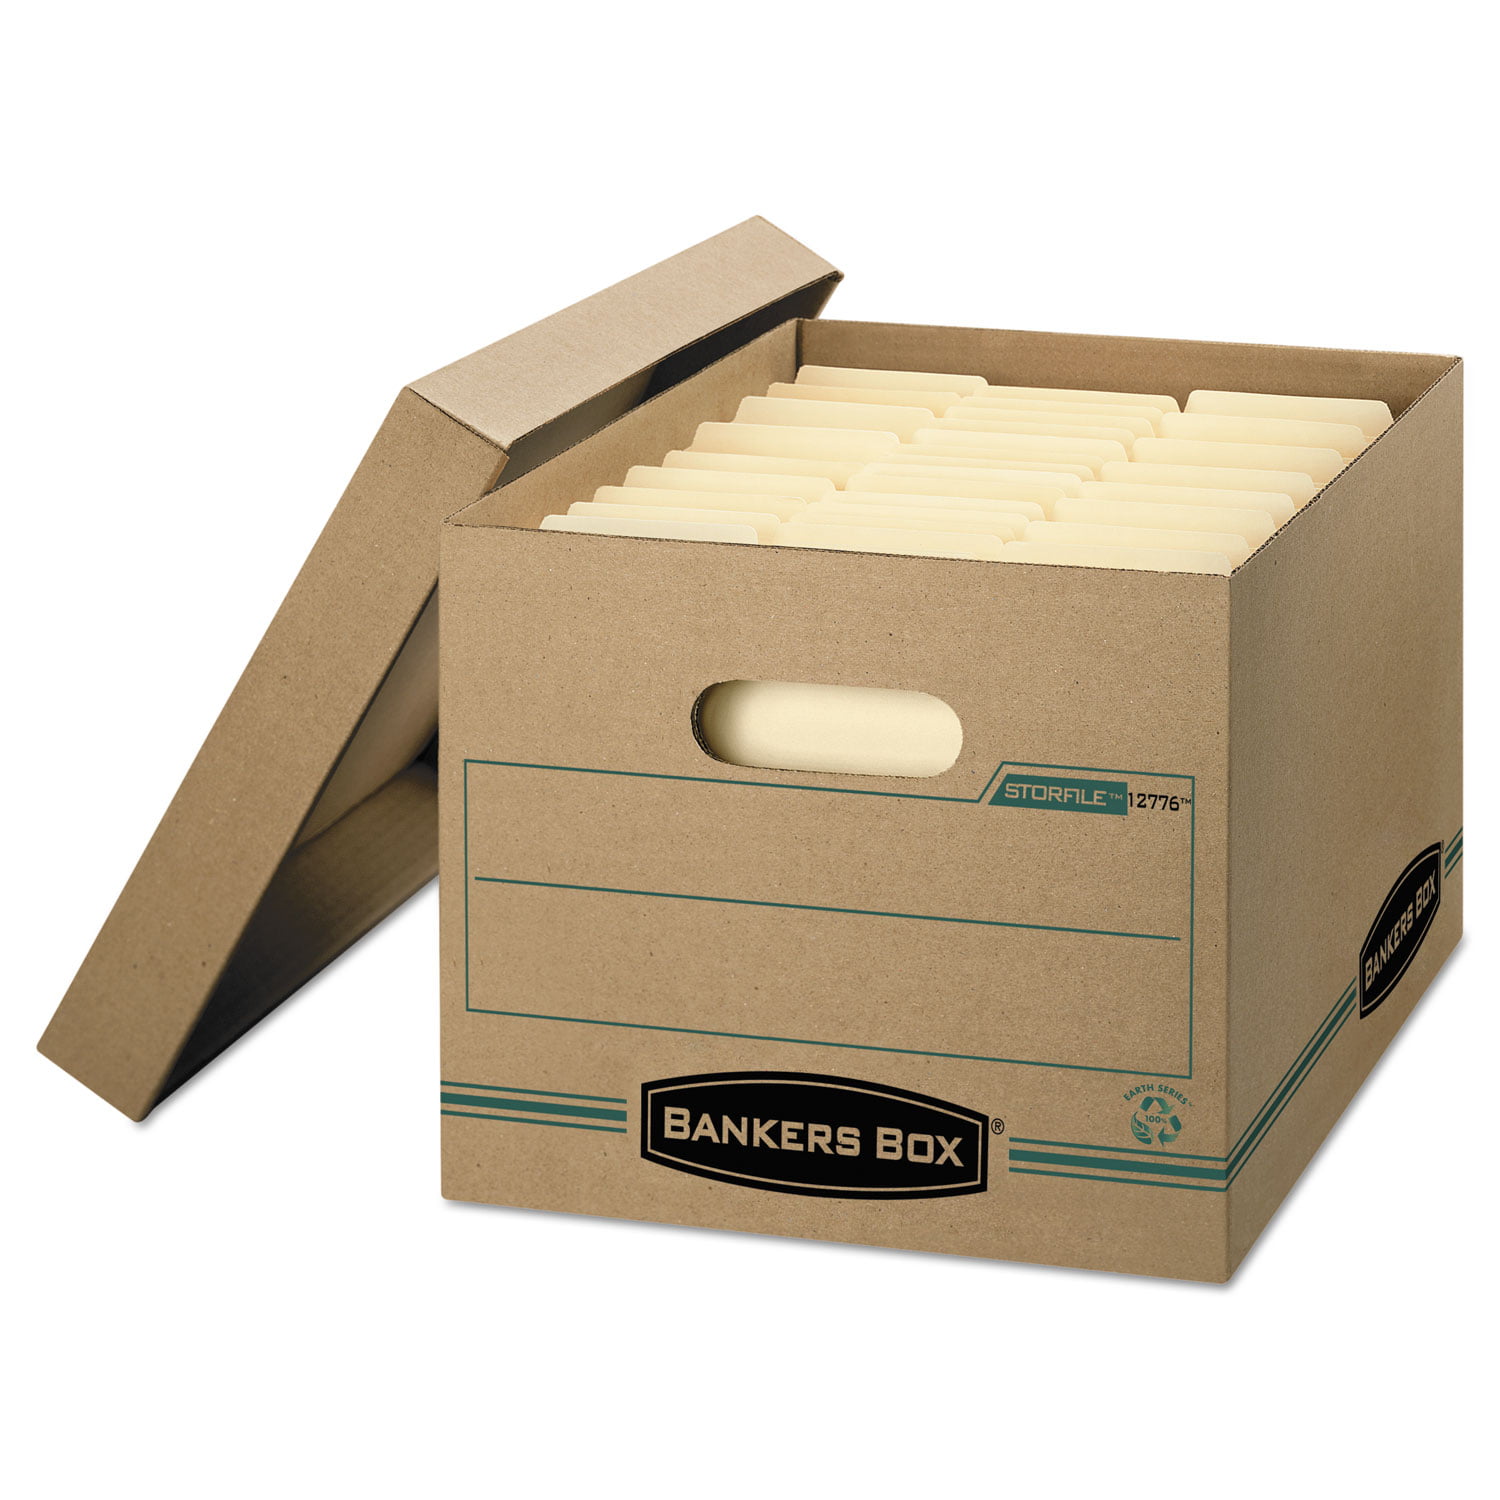 Original-Bankers Box Stor/File Storage Box Letter/Legal Lift-Off Lid White 6Pack